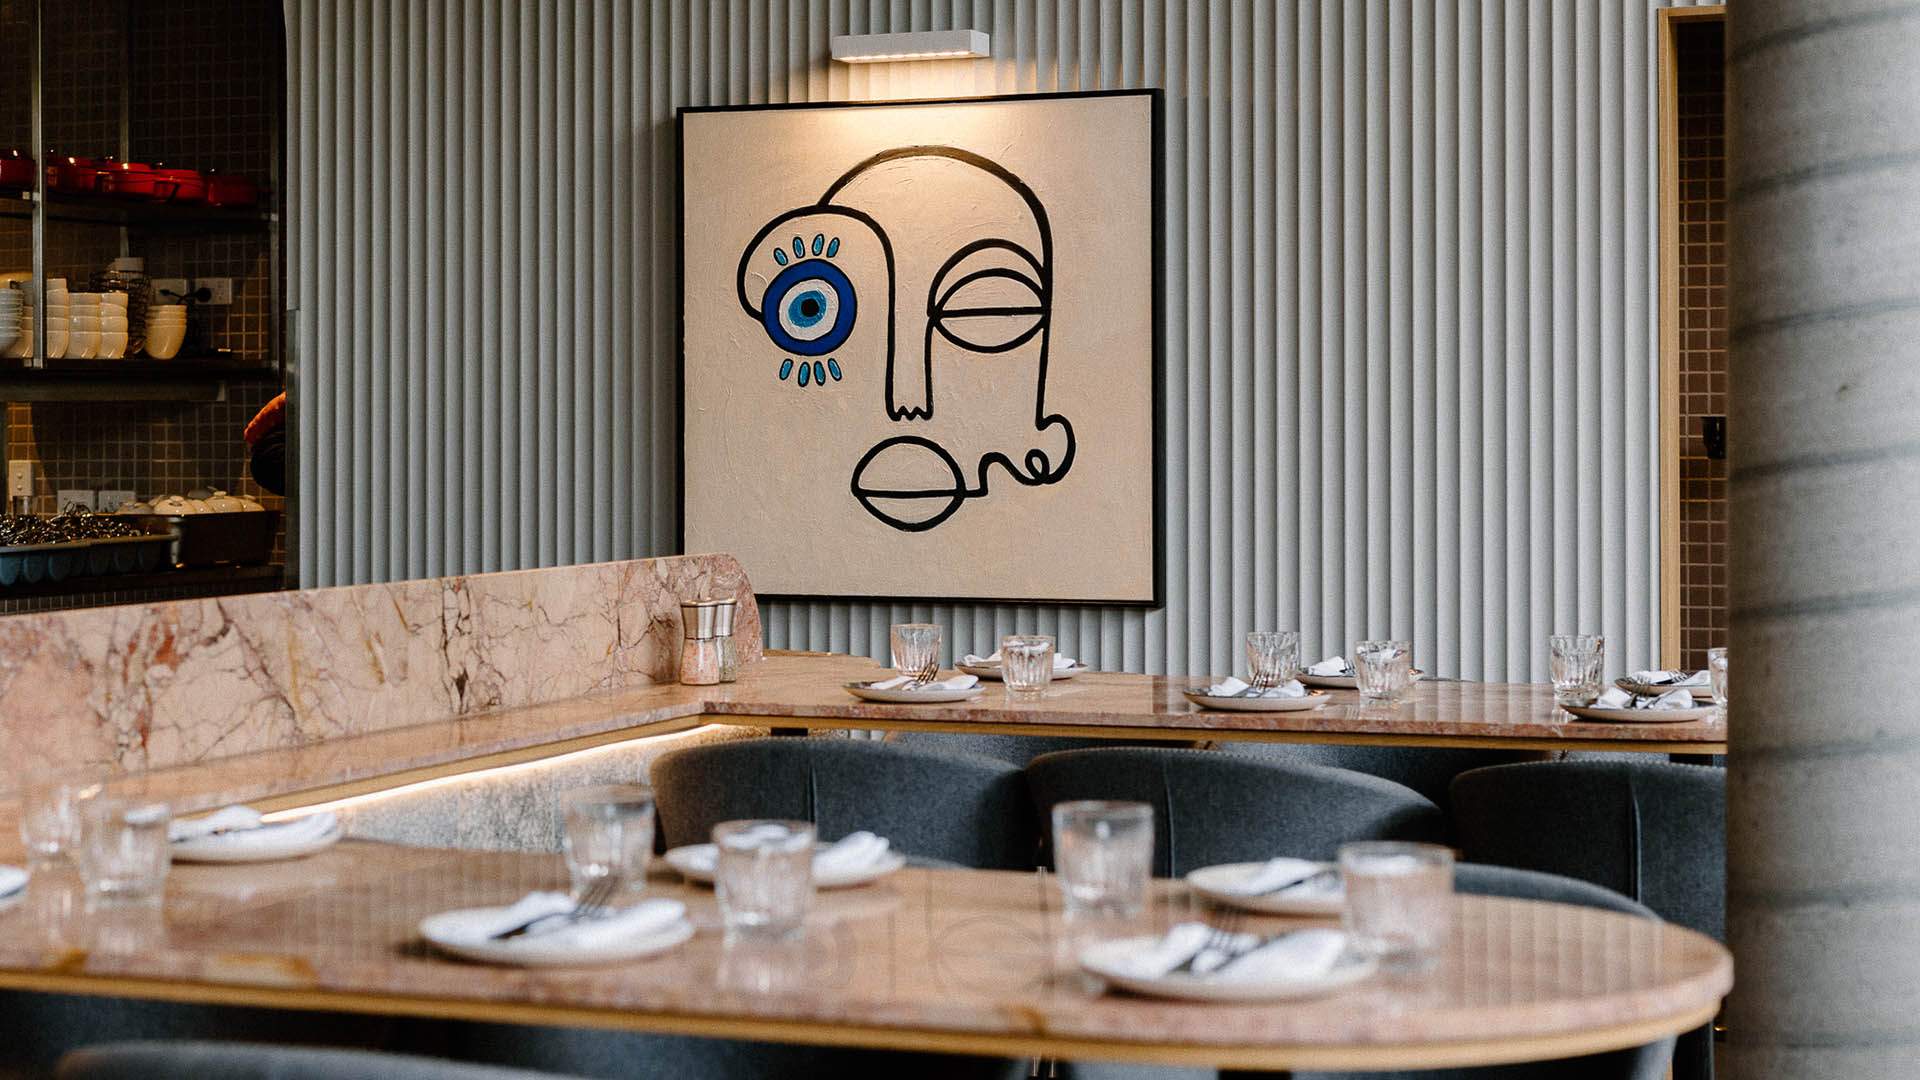 Yamas Greek + Drink Is West Village's New Parkside Seafood and Souvla Restaurant From the Opa Crew